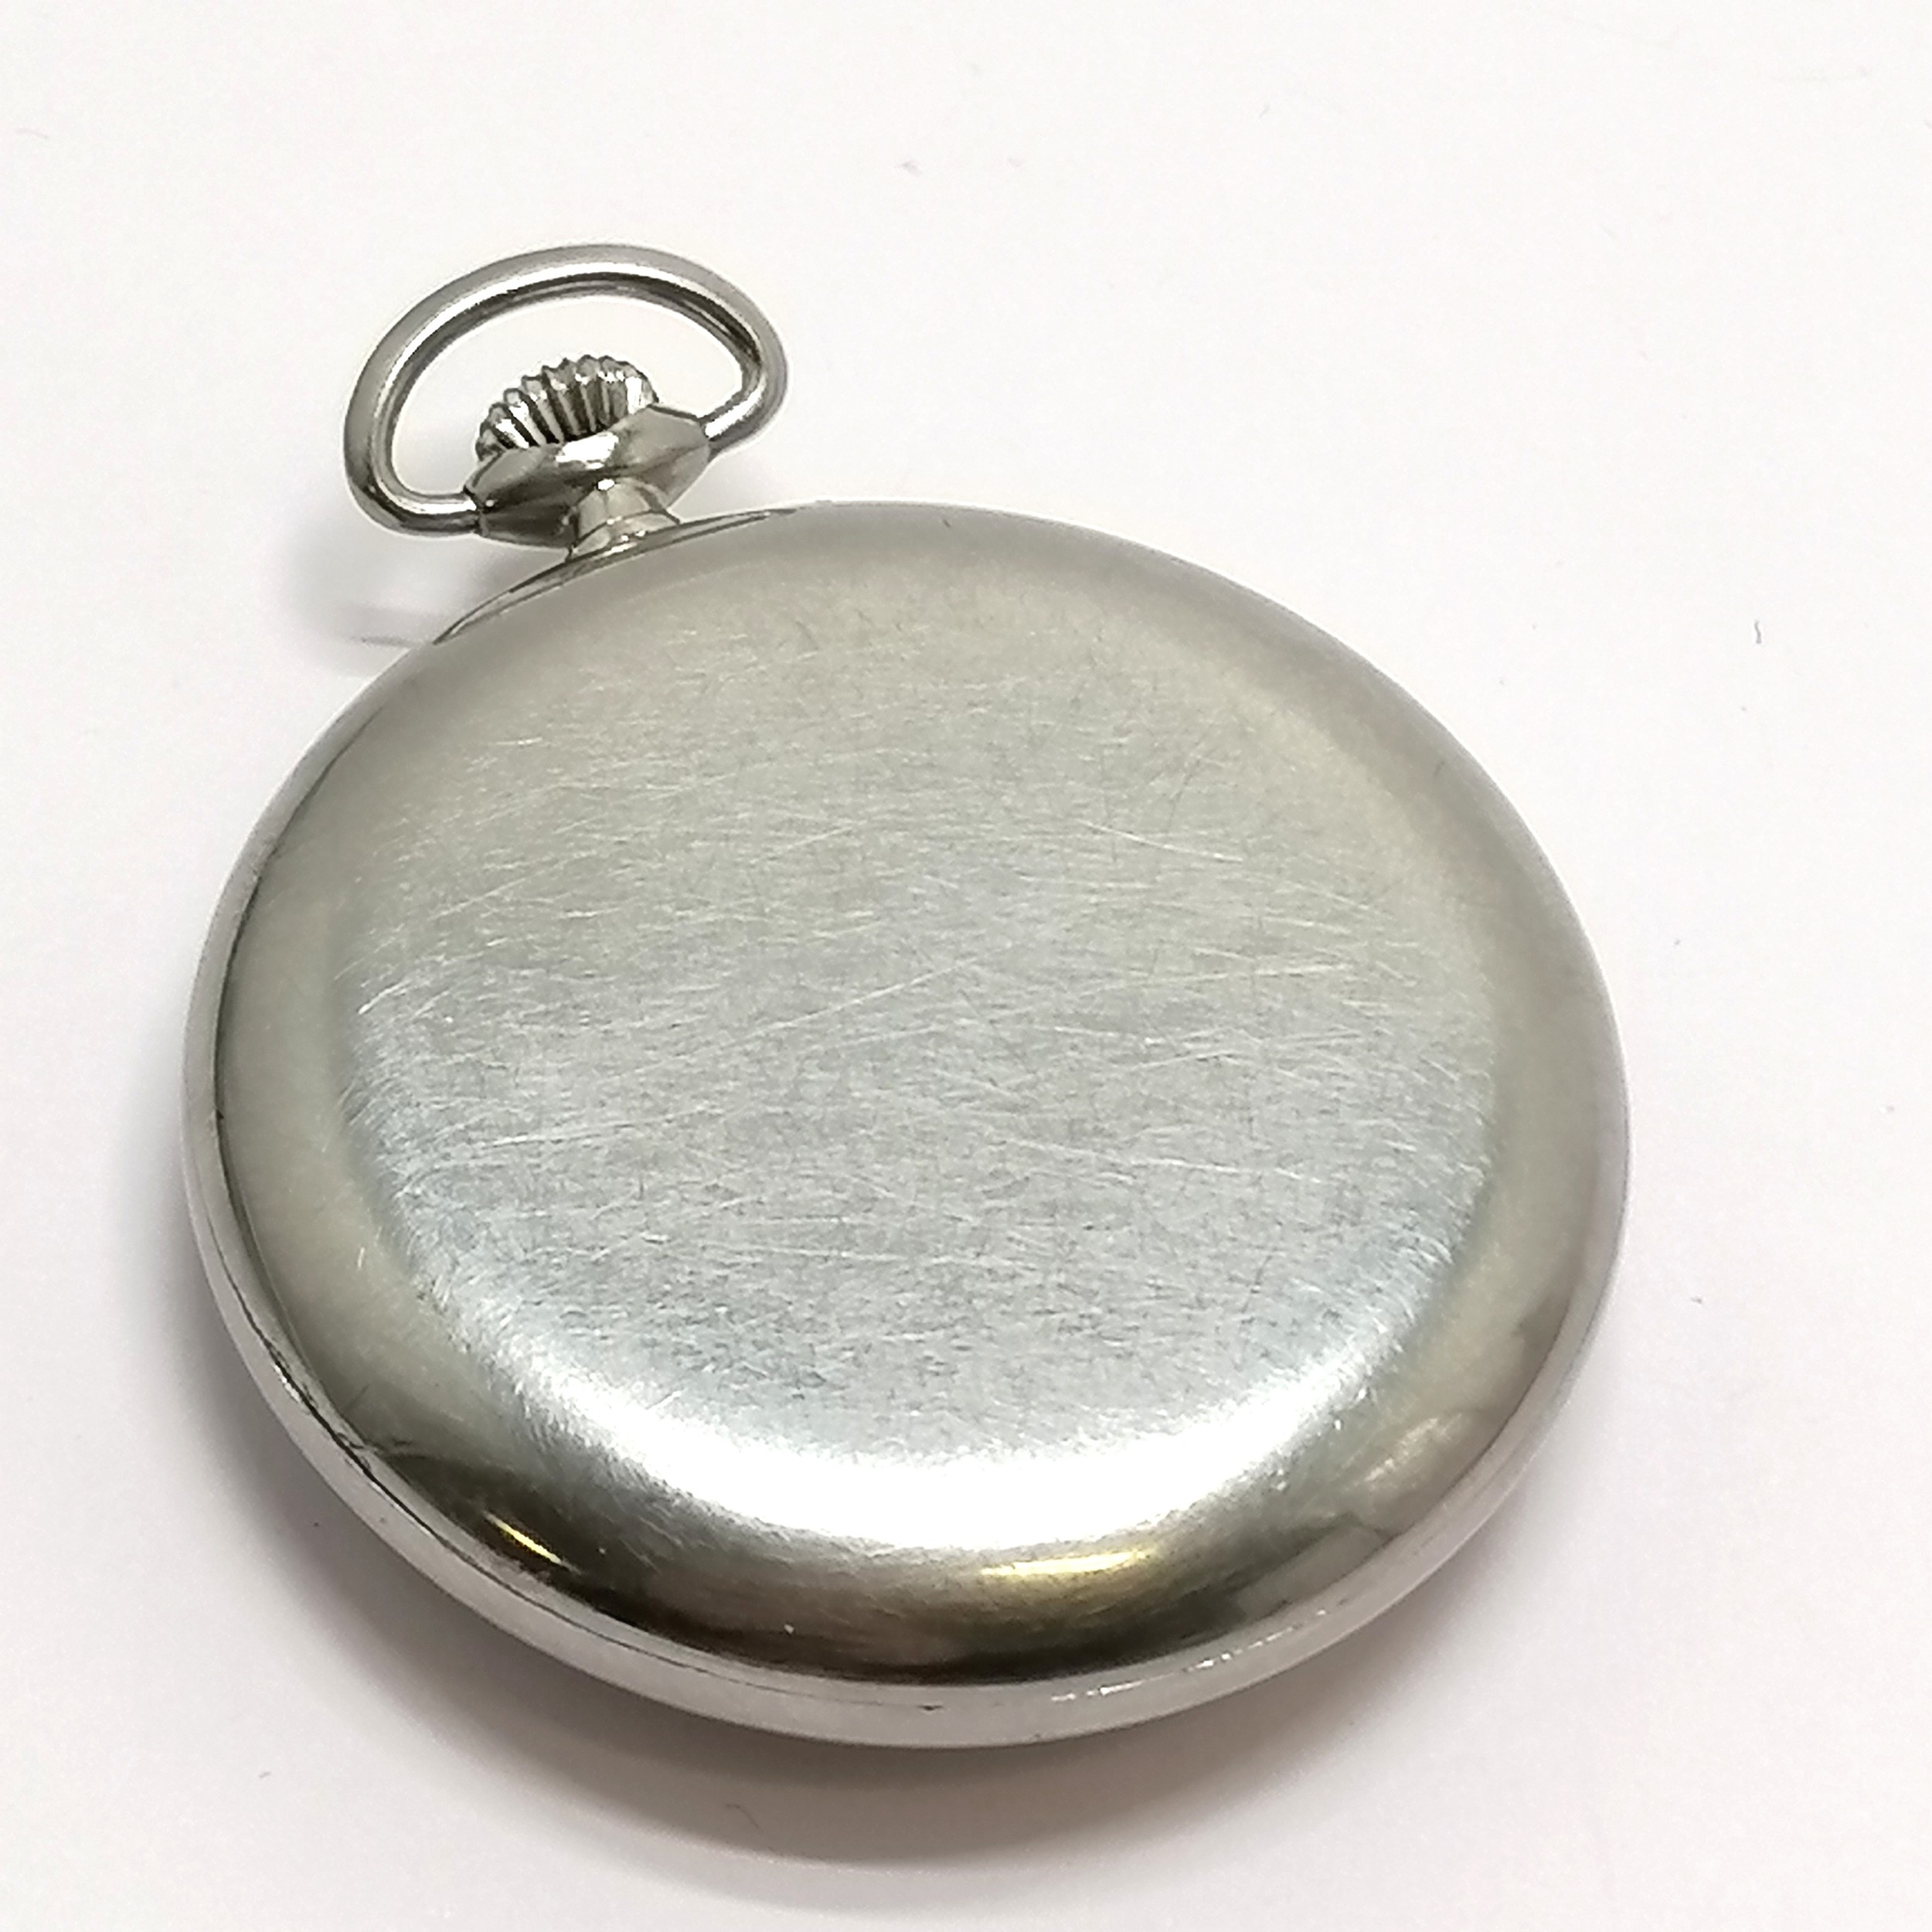 Zenith pocket watch in steel 48mm case with centre sweep second hand #18-28-2-T - Zenith marked case - Image 2 of 4